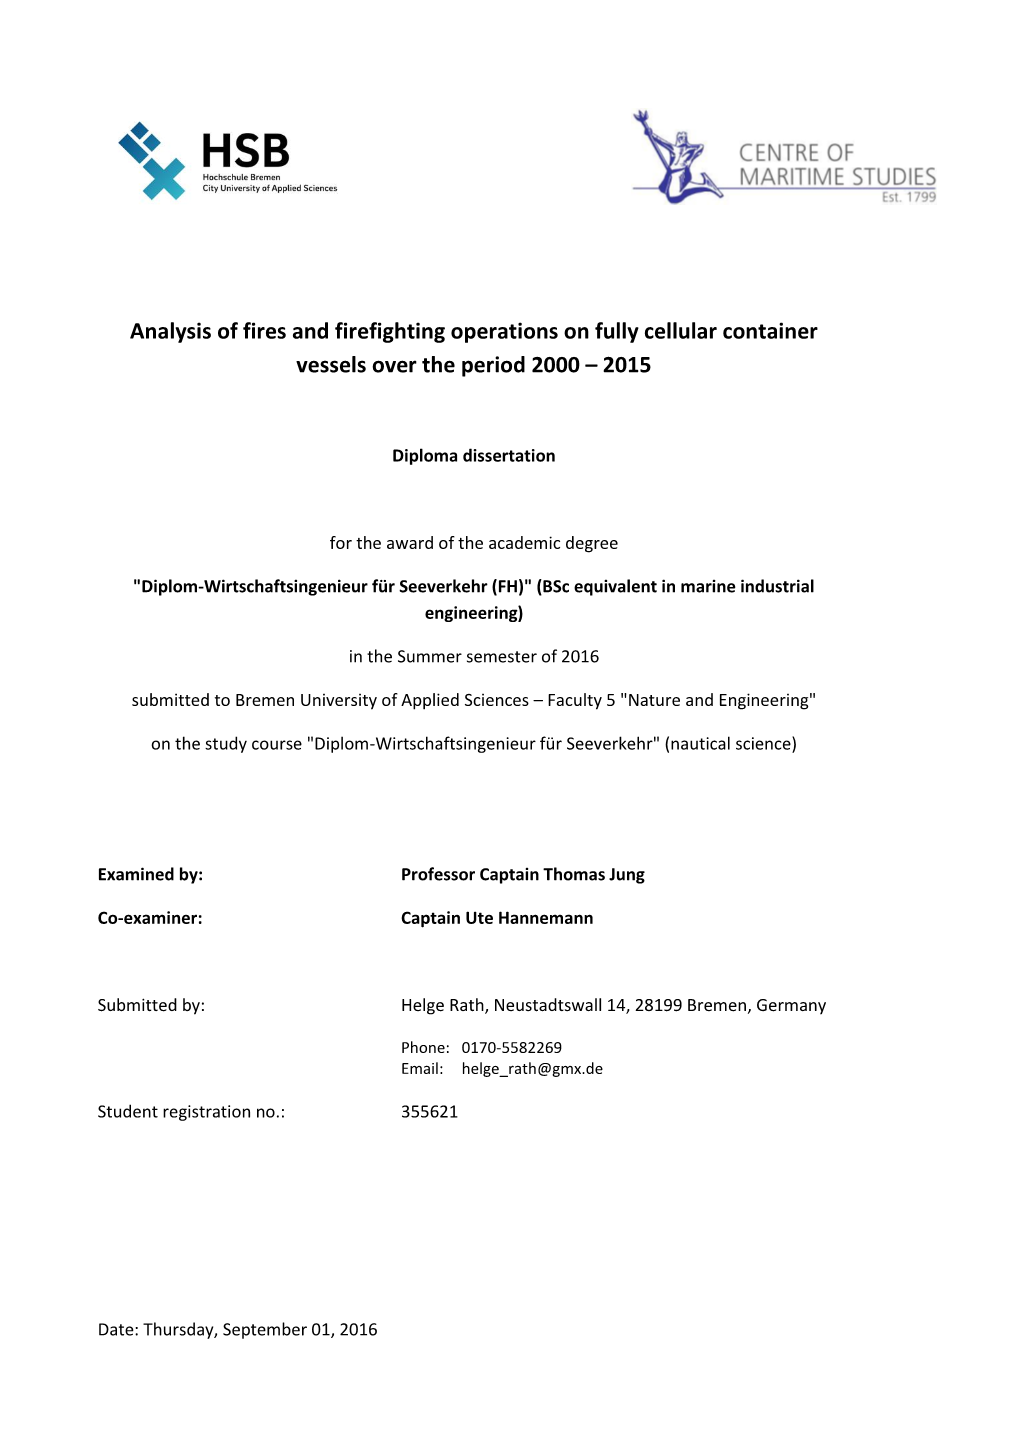 Analysis of Fires and Firefighting Operations on Fully Cellular Container Vessels Over the Period 2000 – 2015